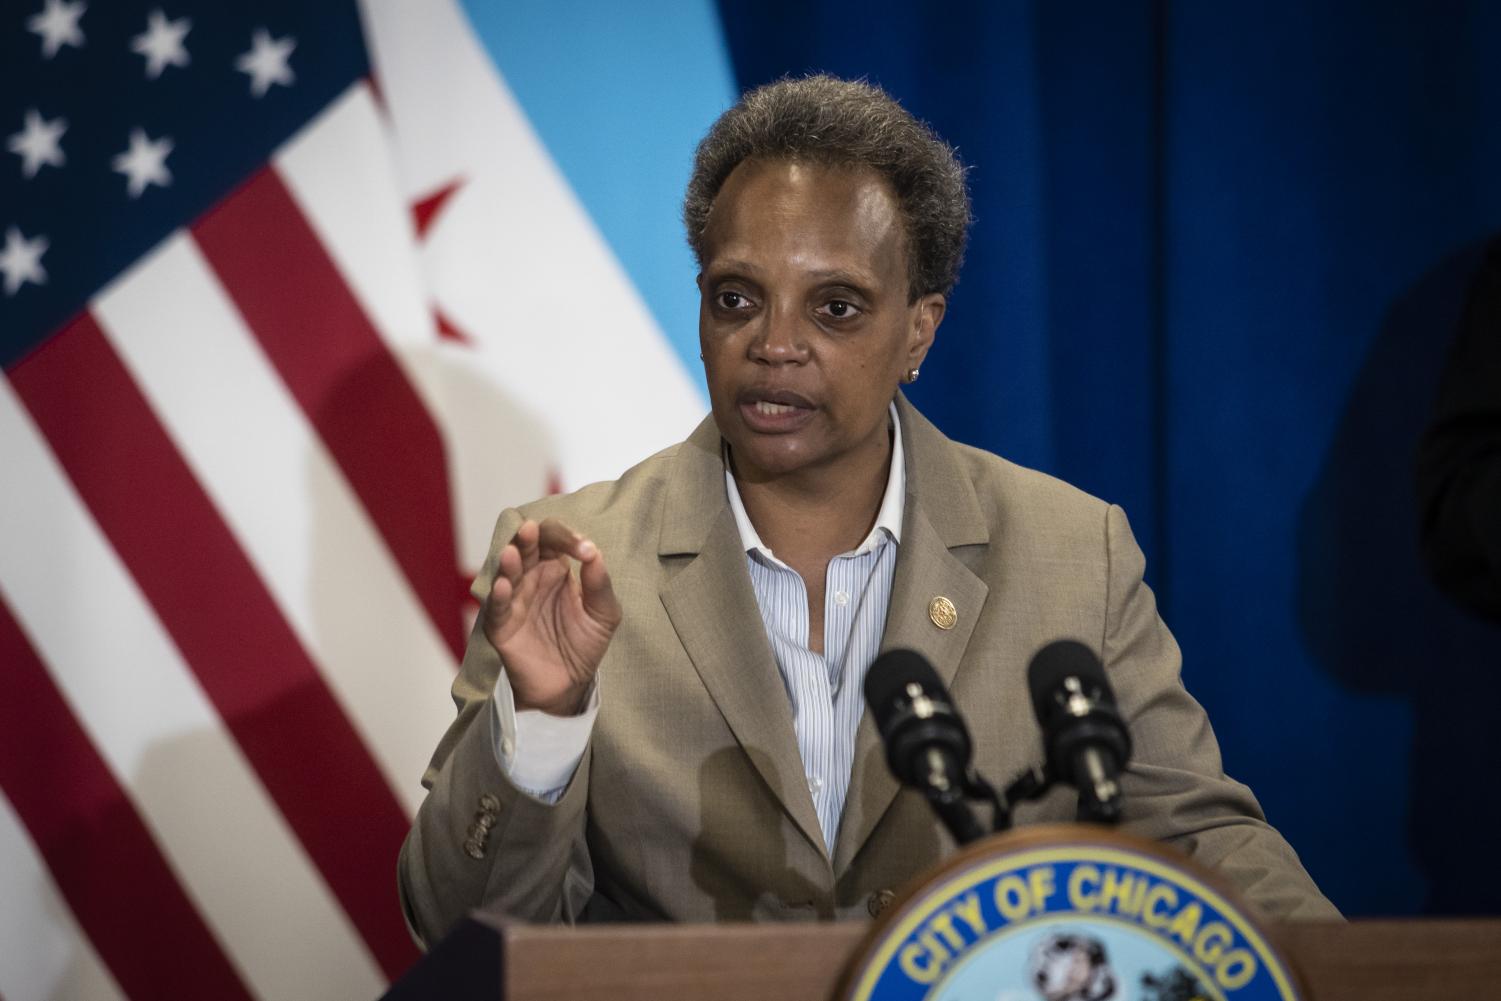 Chicago Resiliency Fund to provide 1,000 to those who didn’t receive a